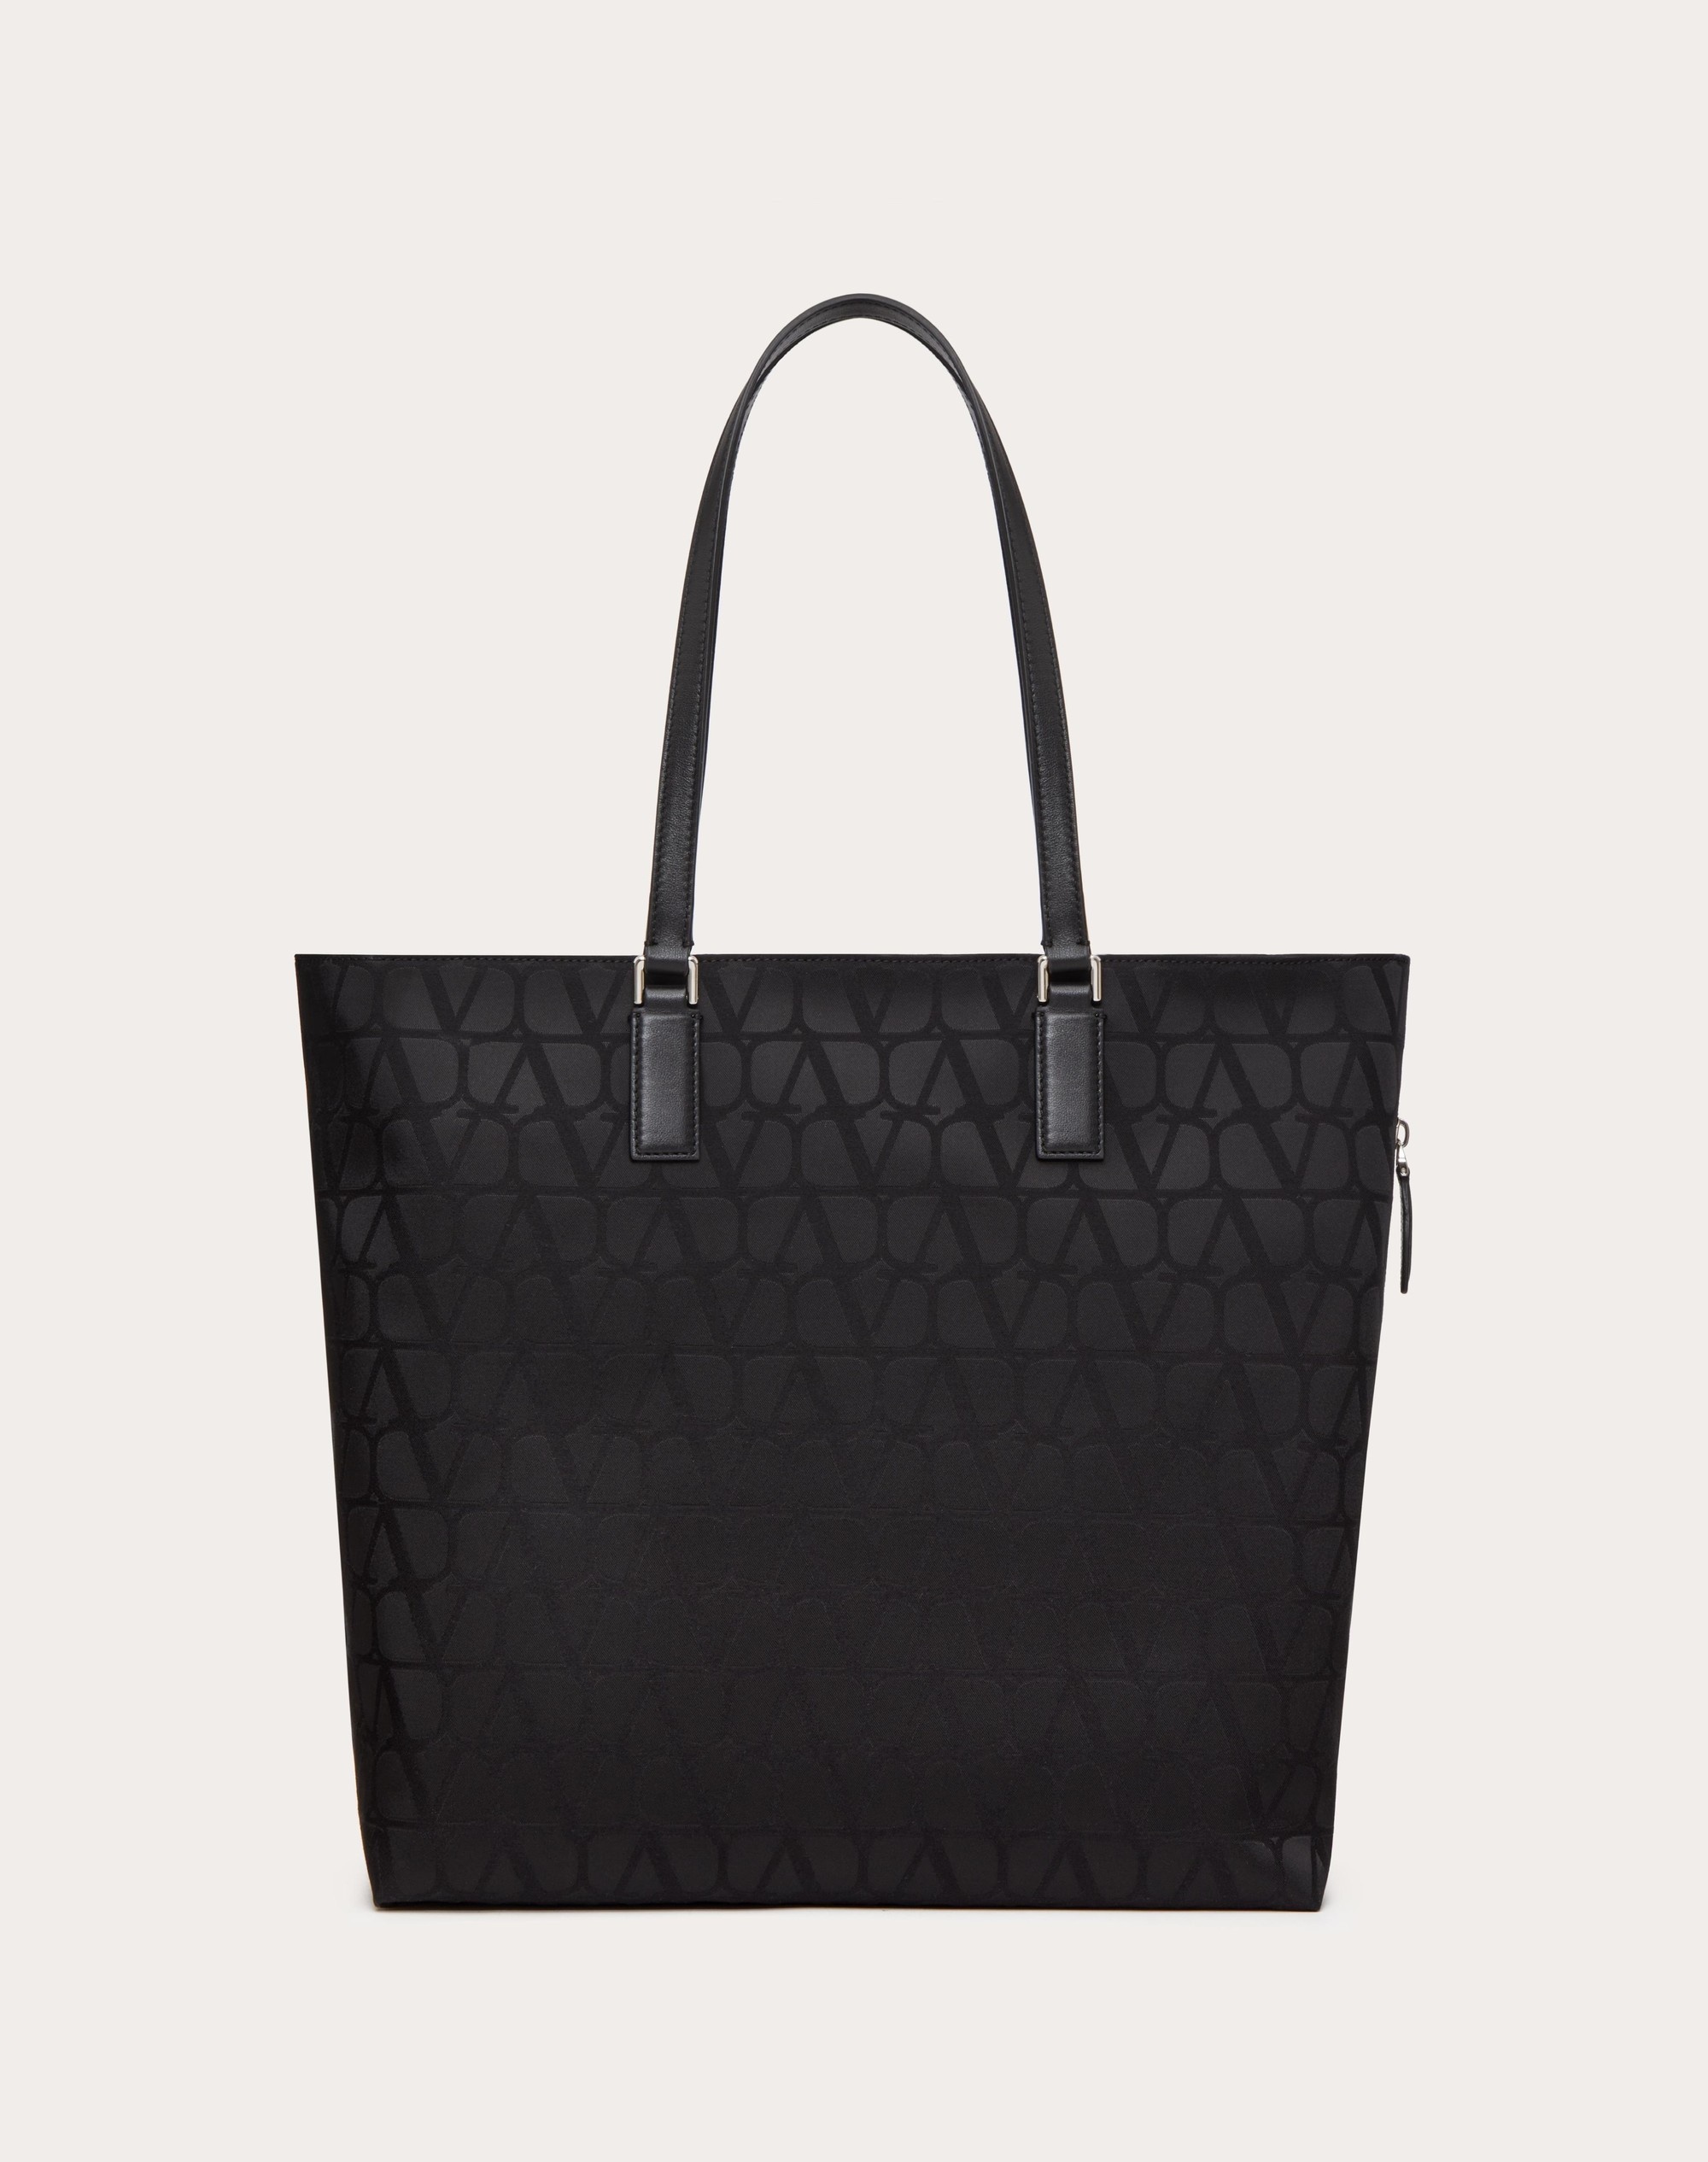 TOILE ICONOGRAPHE SHOPPING BAG IN TECHNICAL FABRIC WITH LEATHER DETAILS - 4